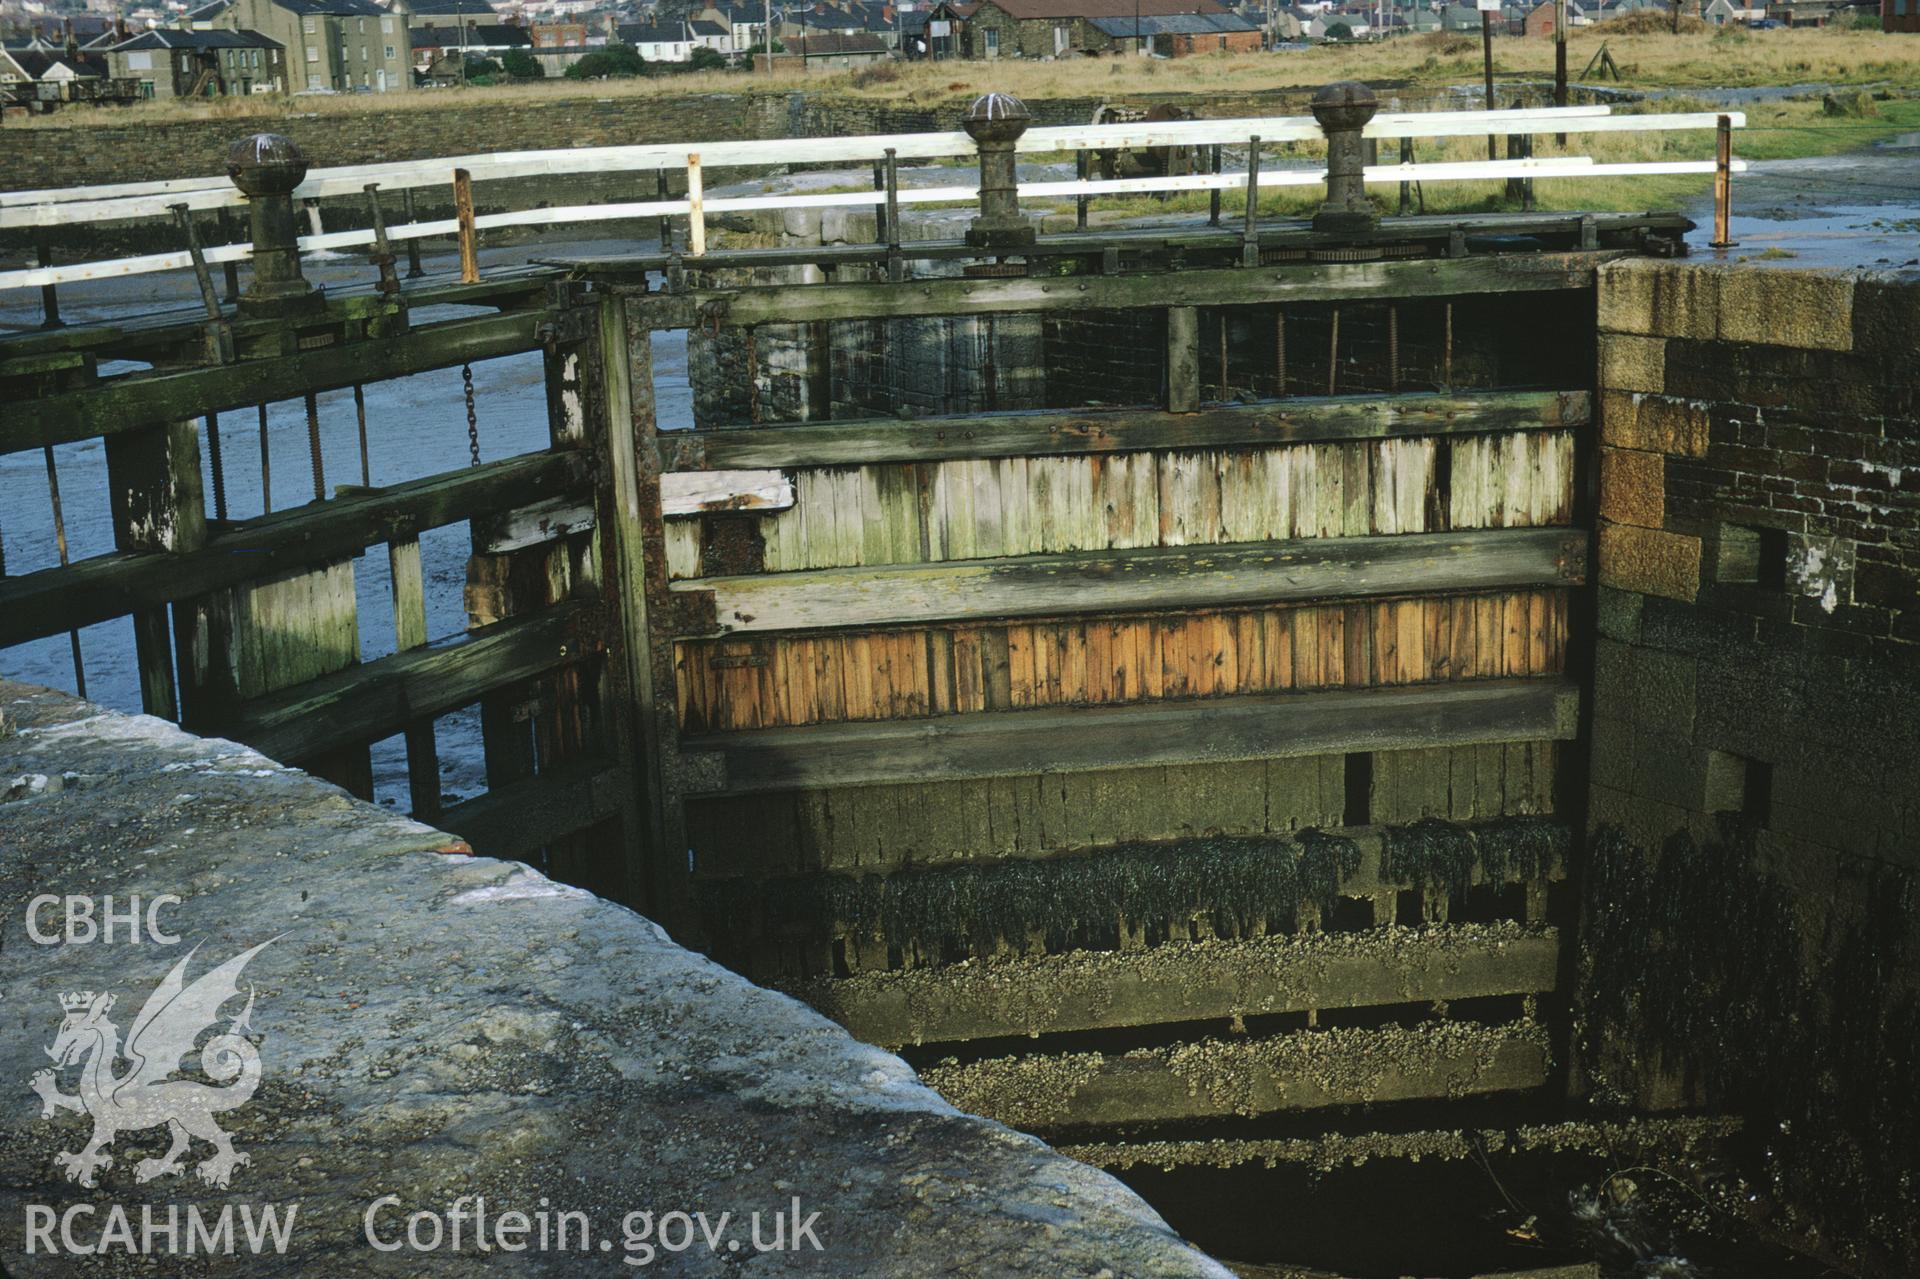 35mm colour slide showing the East Lock Gate, Burry Port Harbour, by Dylan Roberts.